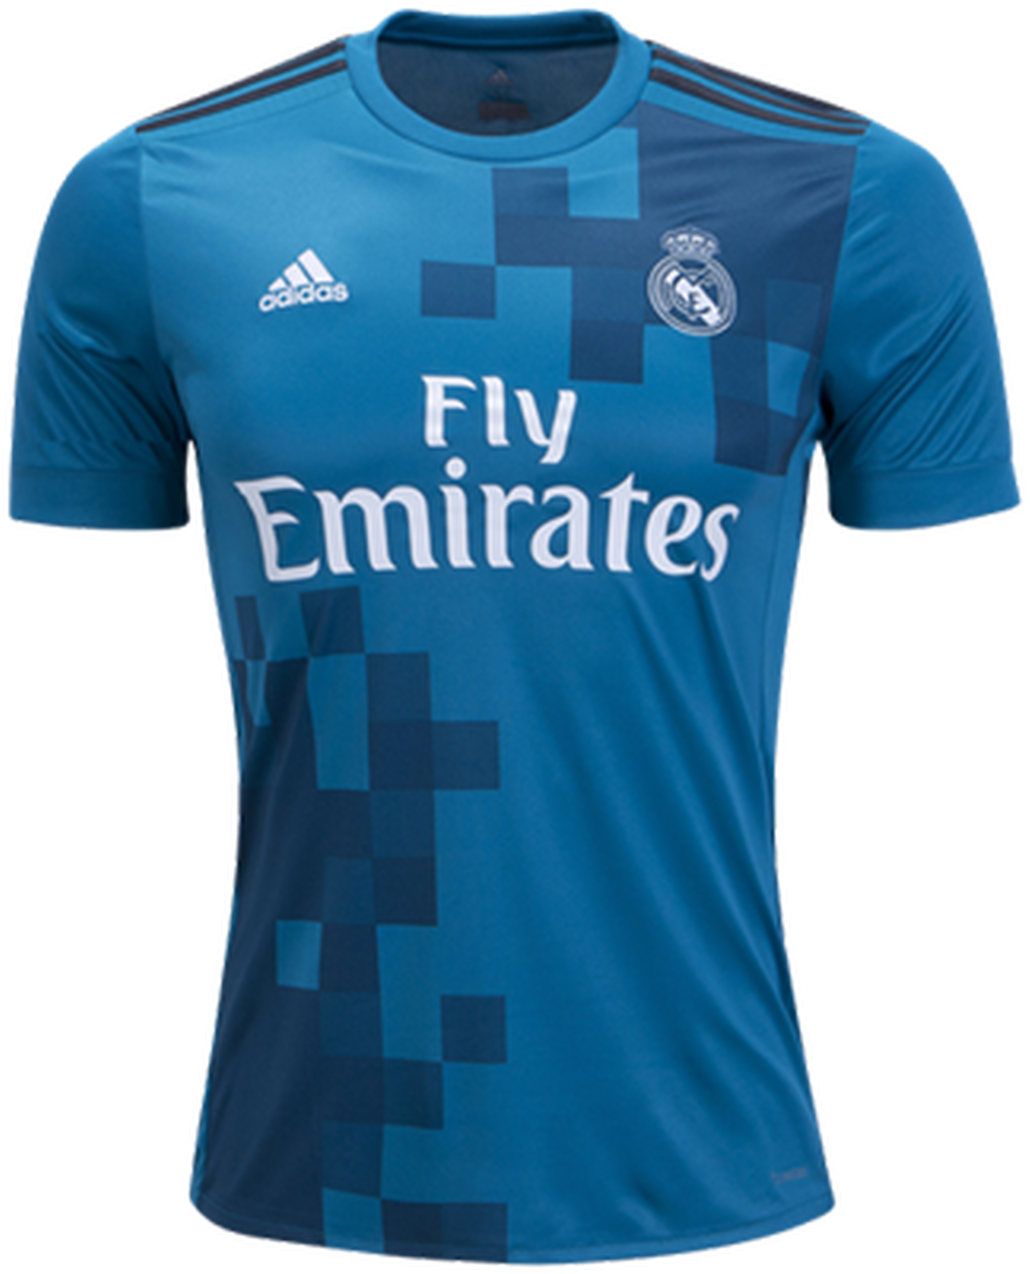 Fly Emirates Adidas Soccer Jersey PNG image